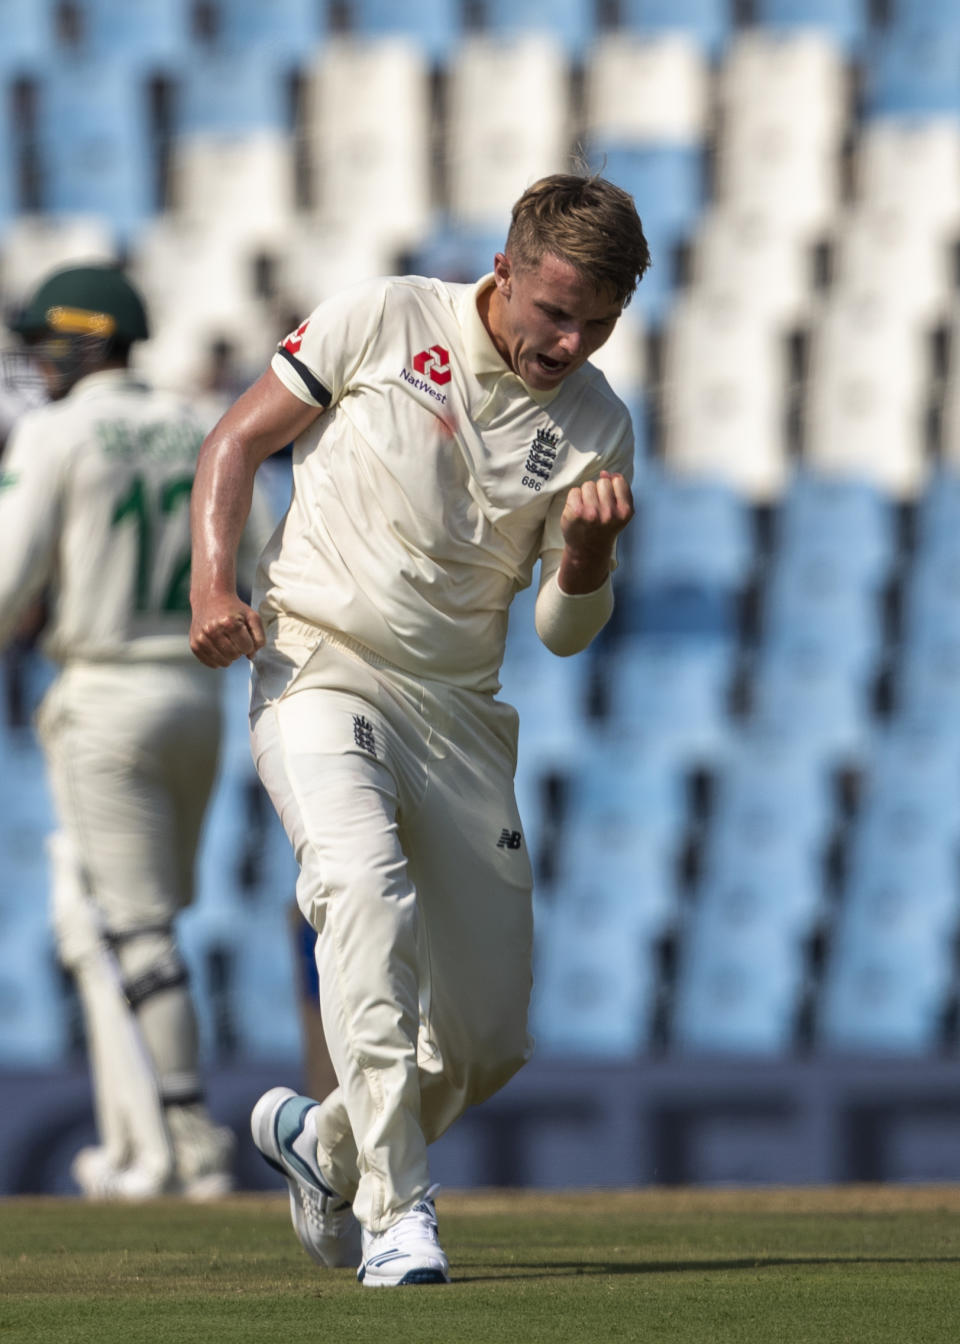 England's bowler Sam Curran reacts after dismissing South Africa's batsman Dwaine Pretorius for 33 runs on day one of the first cricket test match between South Africa and England at Centurion Park, Pretoria, South Africa, Thursday, Dec. 26, 2019. (AP Photo/Themba Hadebe)